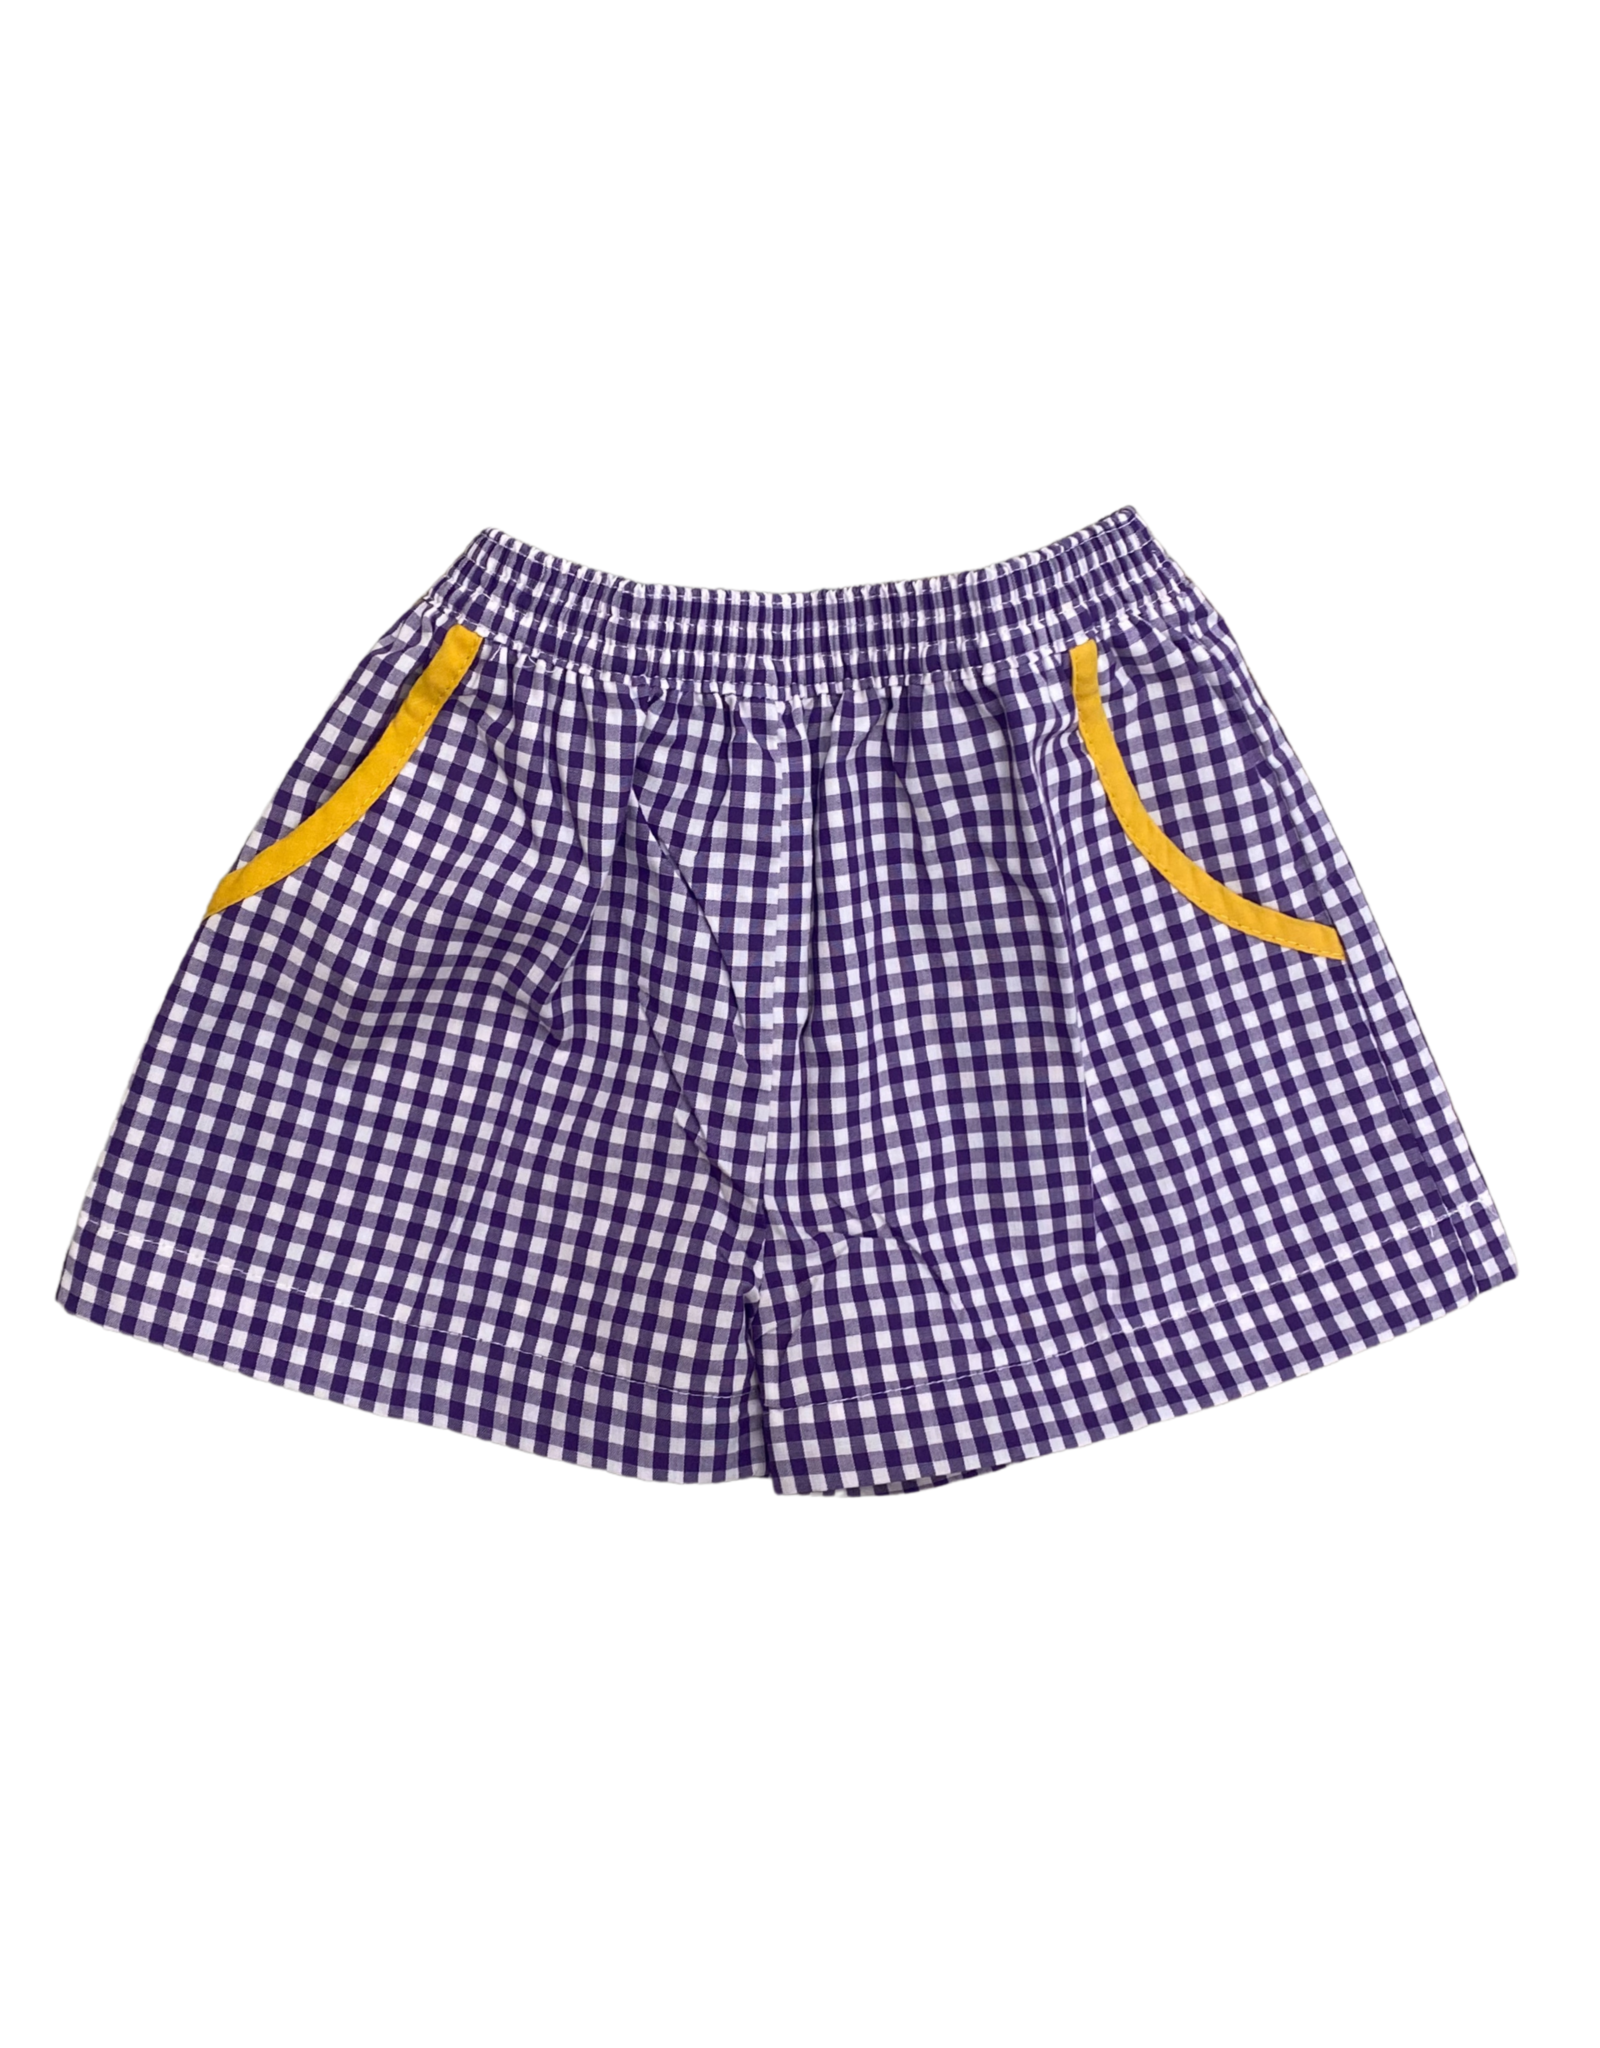 Southern Saturday Purple Gingham with Gold Trim Pocket Shorts